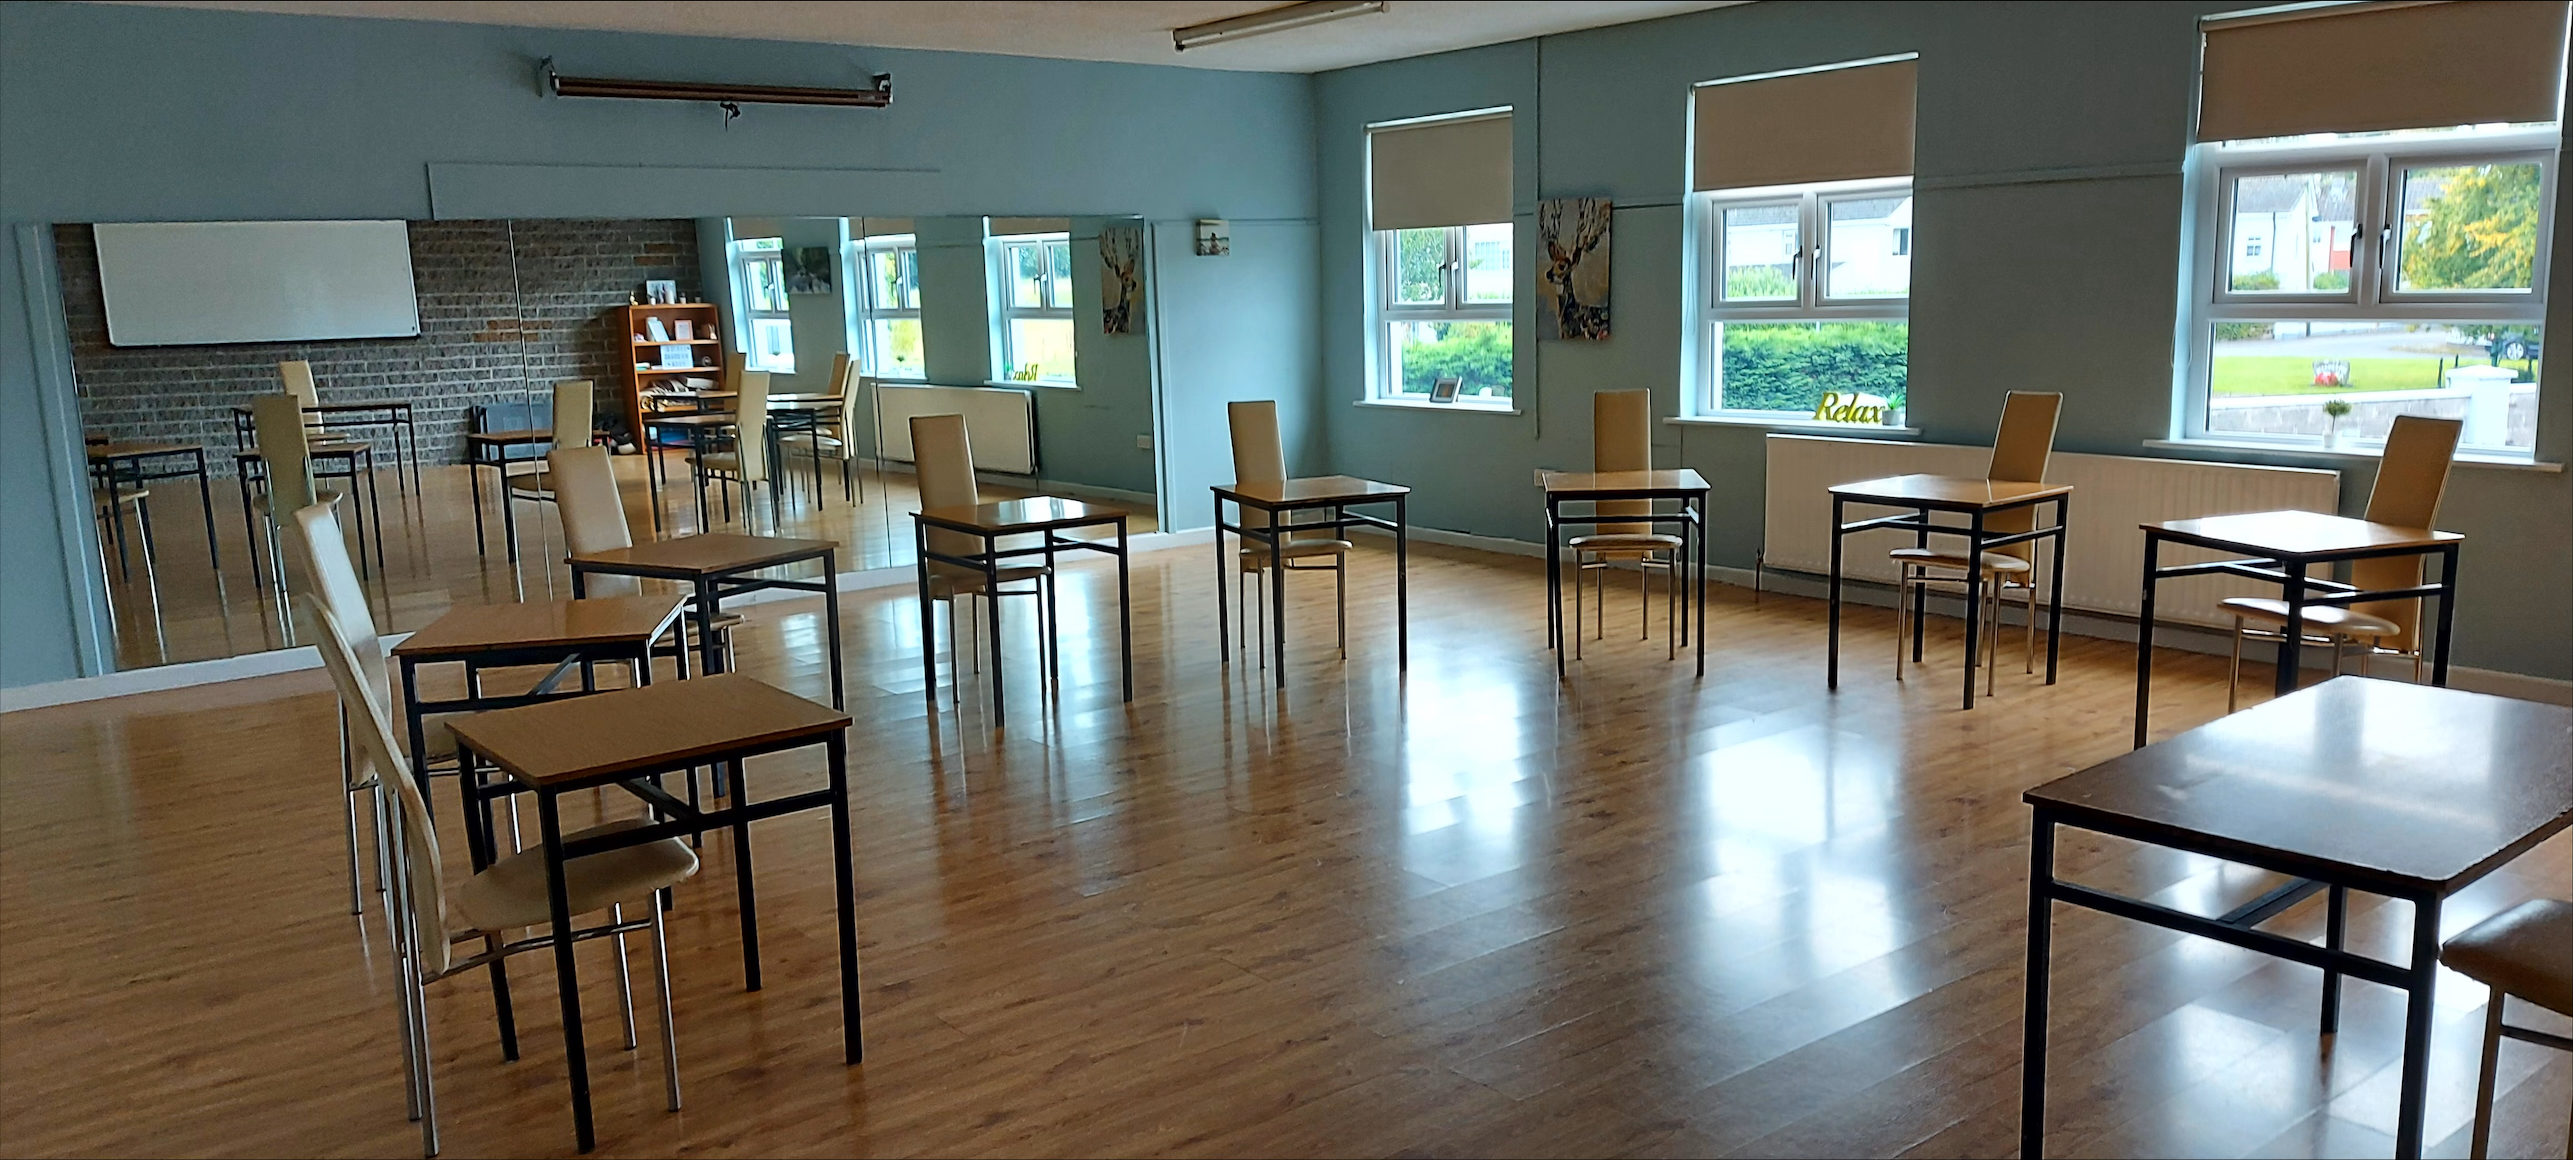 CCC Physical Activity Room